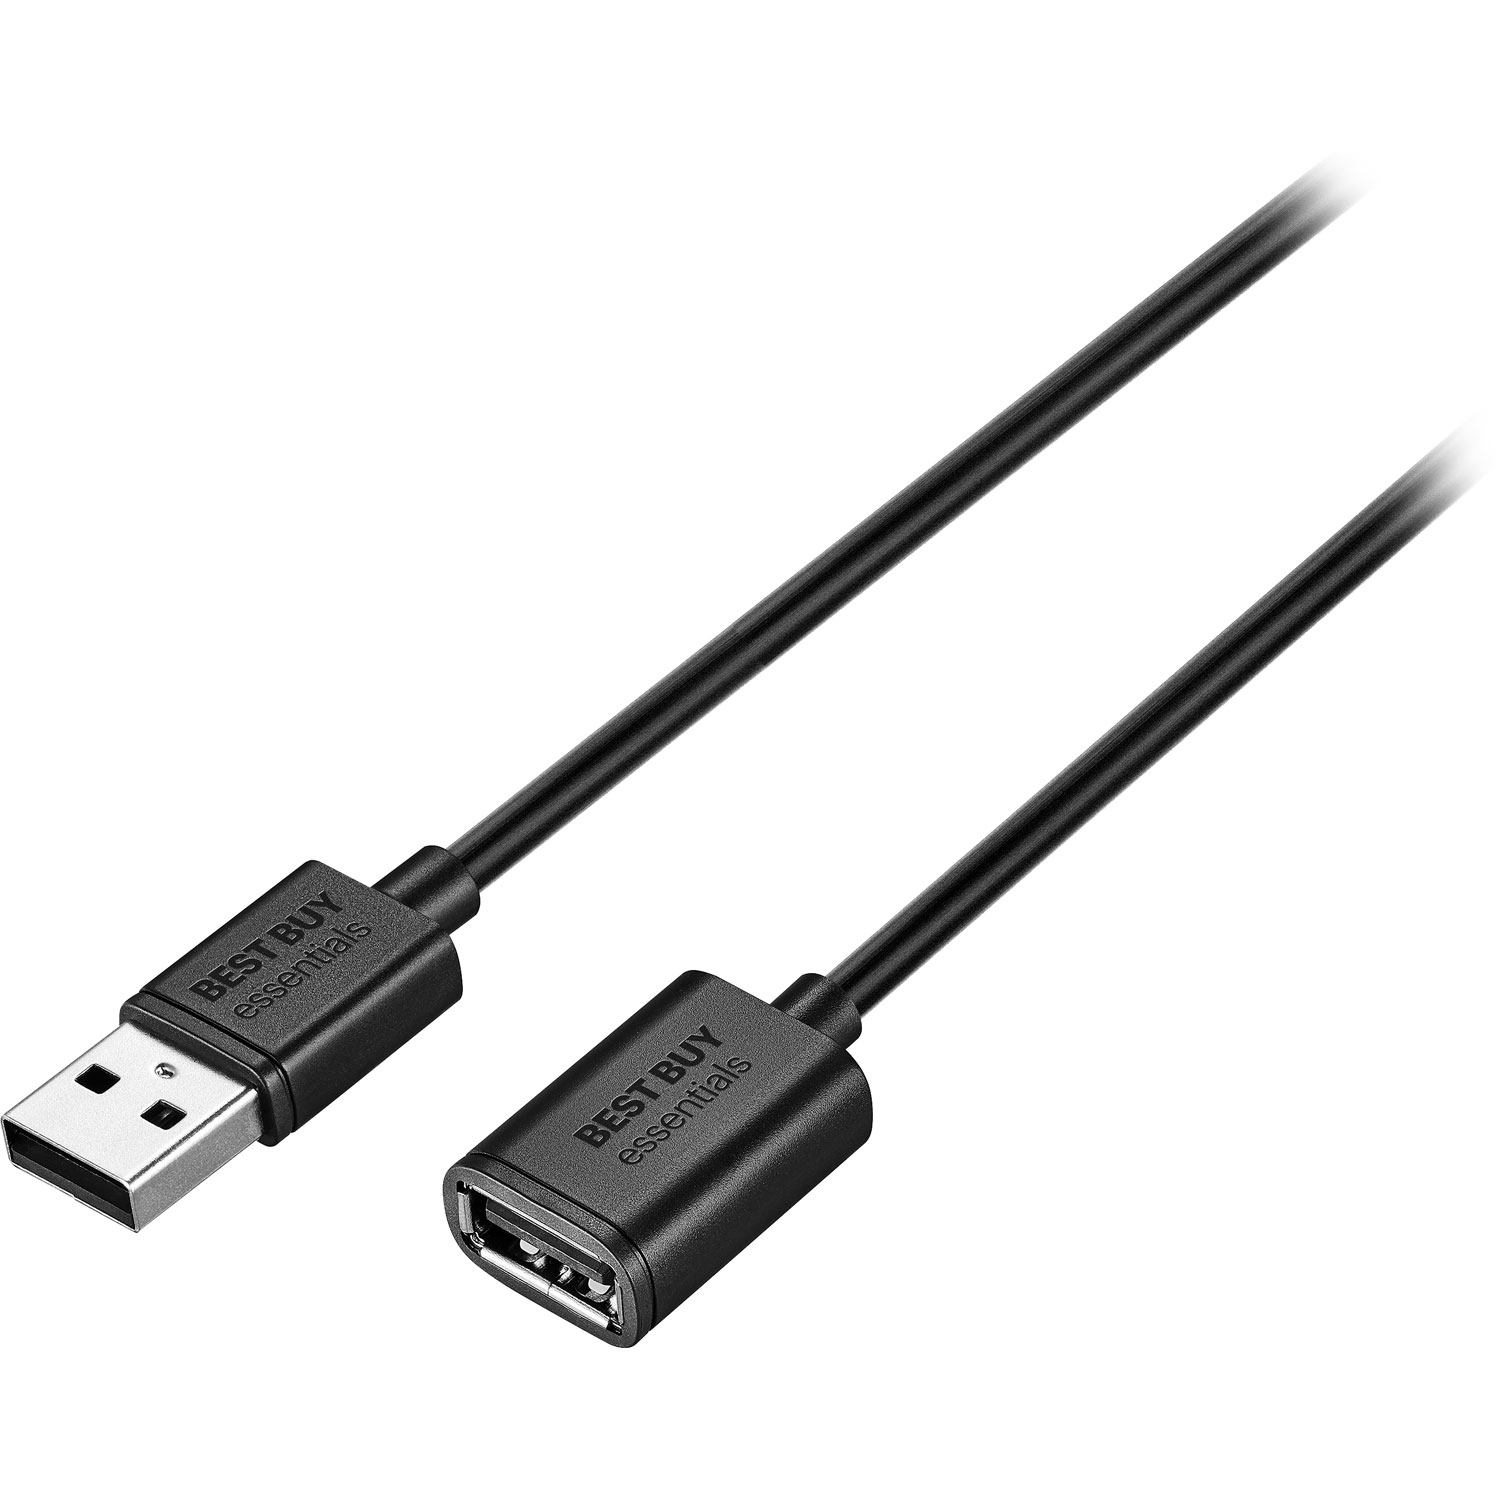 Best Buy Essentials 3.6m (12 ft.) USB-A 2.0 Extension Cable